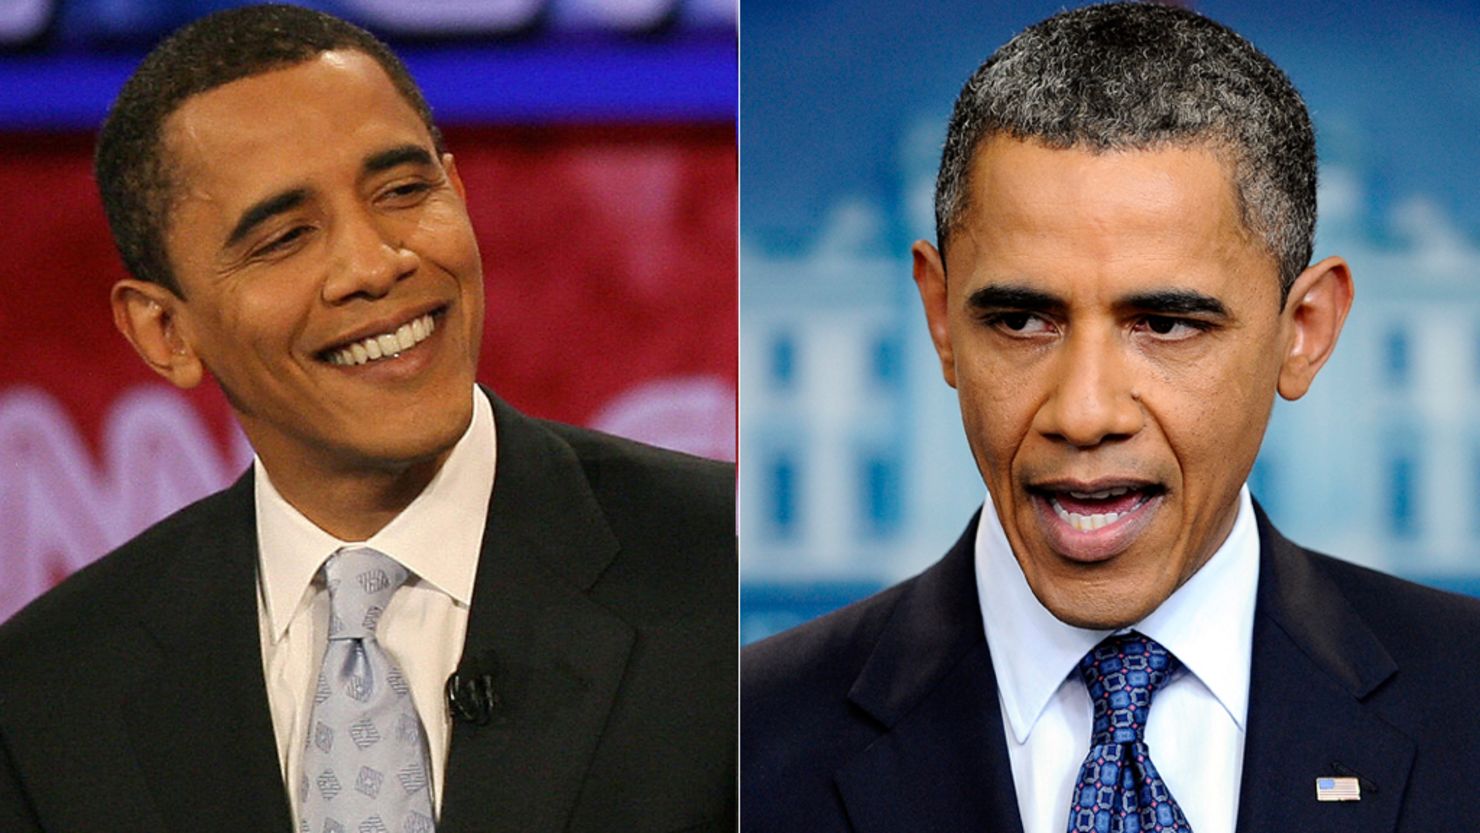 When President Barack Obama celebrated his 50th birthday, the media discussed his gray hair at length. 